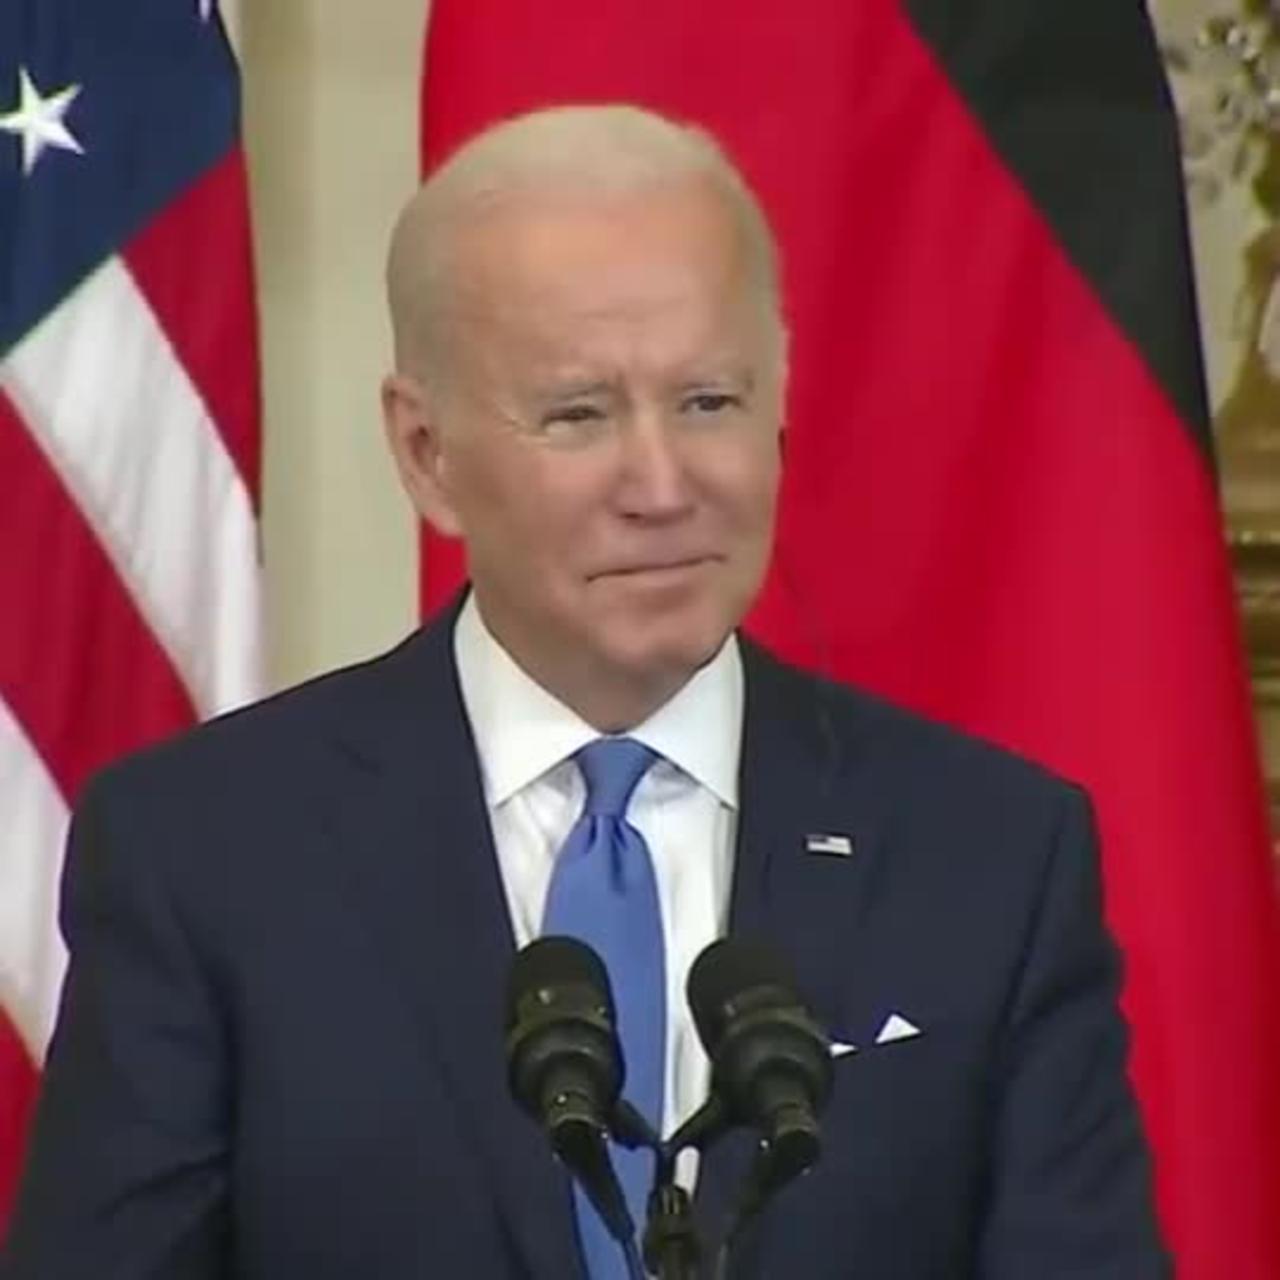 Biden: "If Russia invades...there will be no longer a Nord Stream 2. We will bring an end to it."